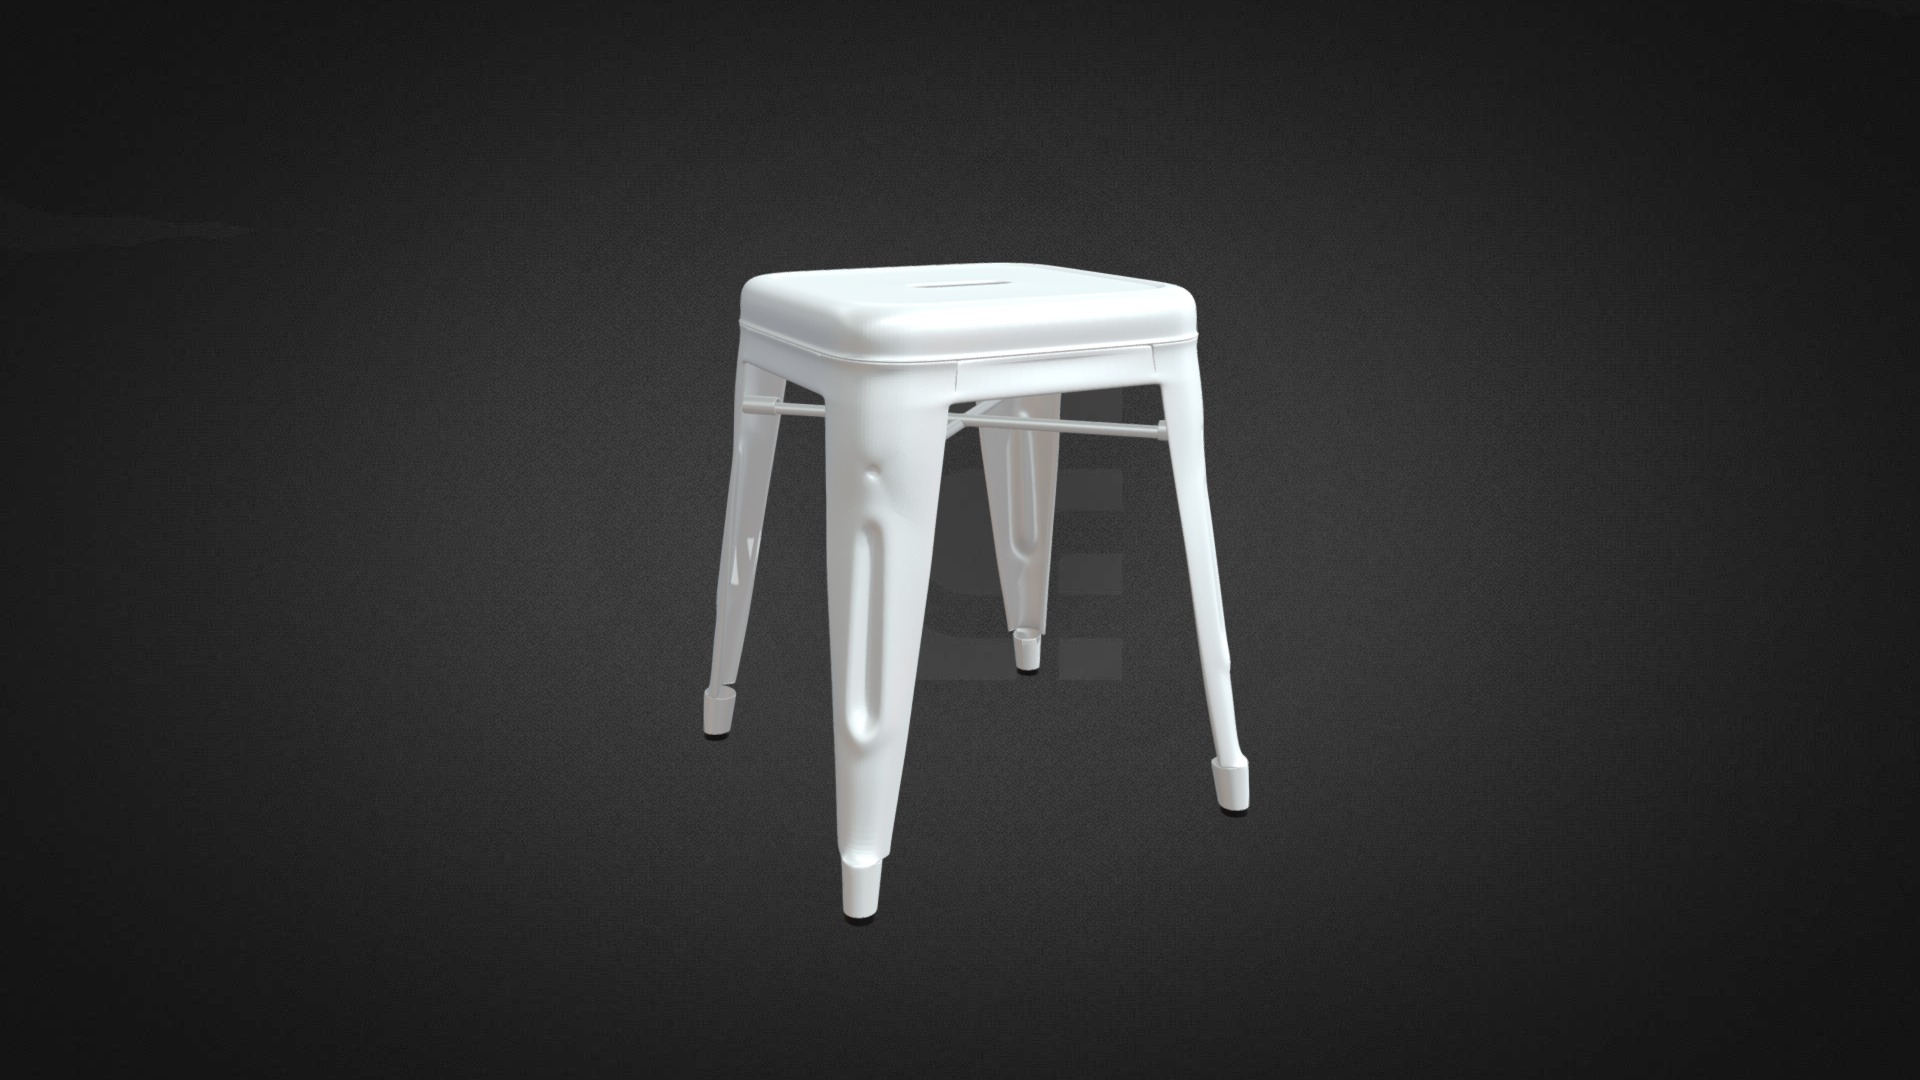 3D model Low Tolix Stool Hire - This is a 3D model of the Low Tolix Stool Hire. The 3D model is about a white chair on a black background.